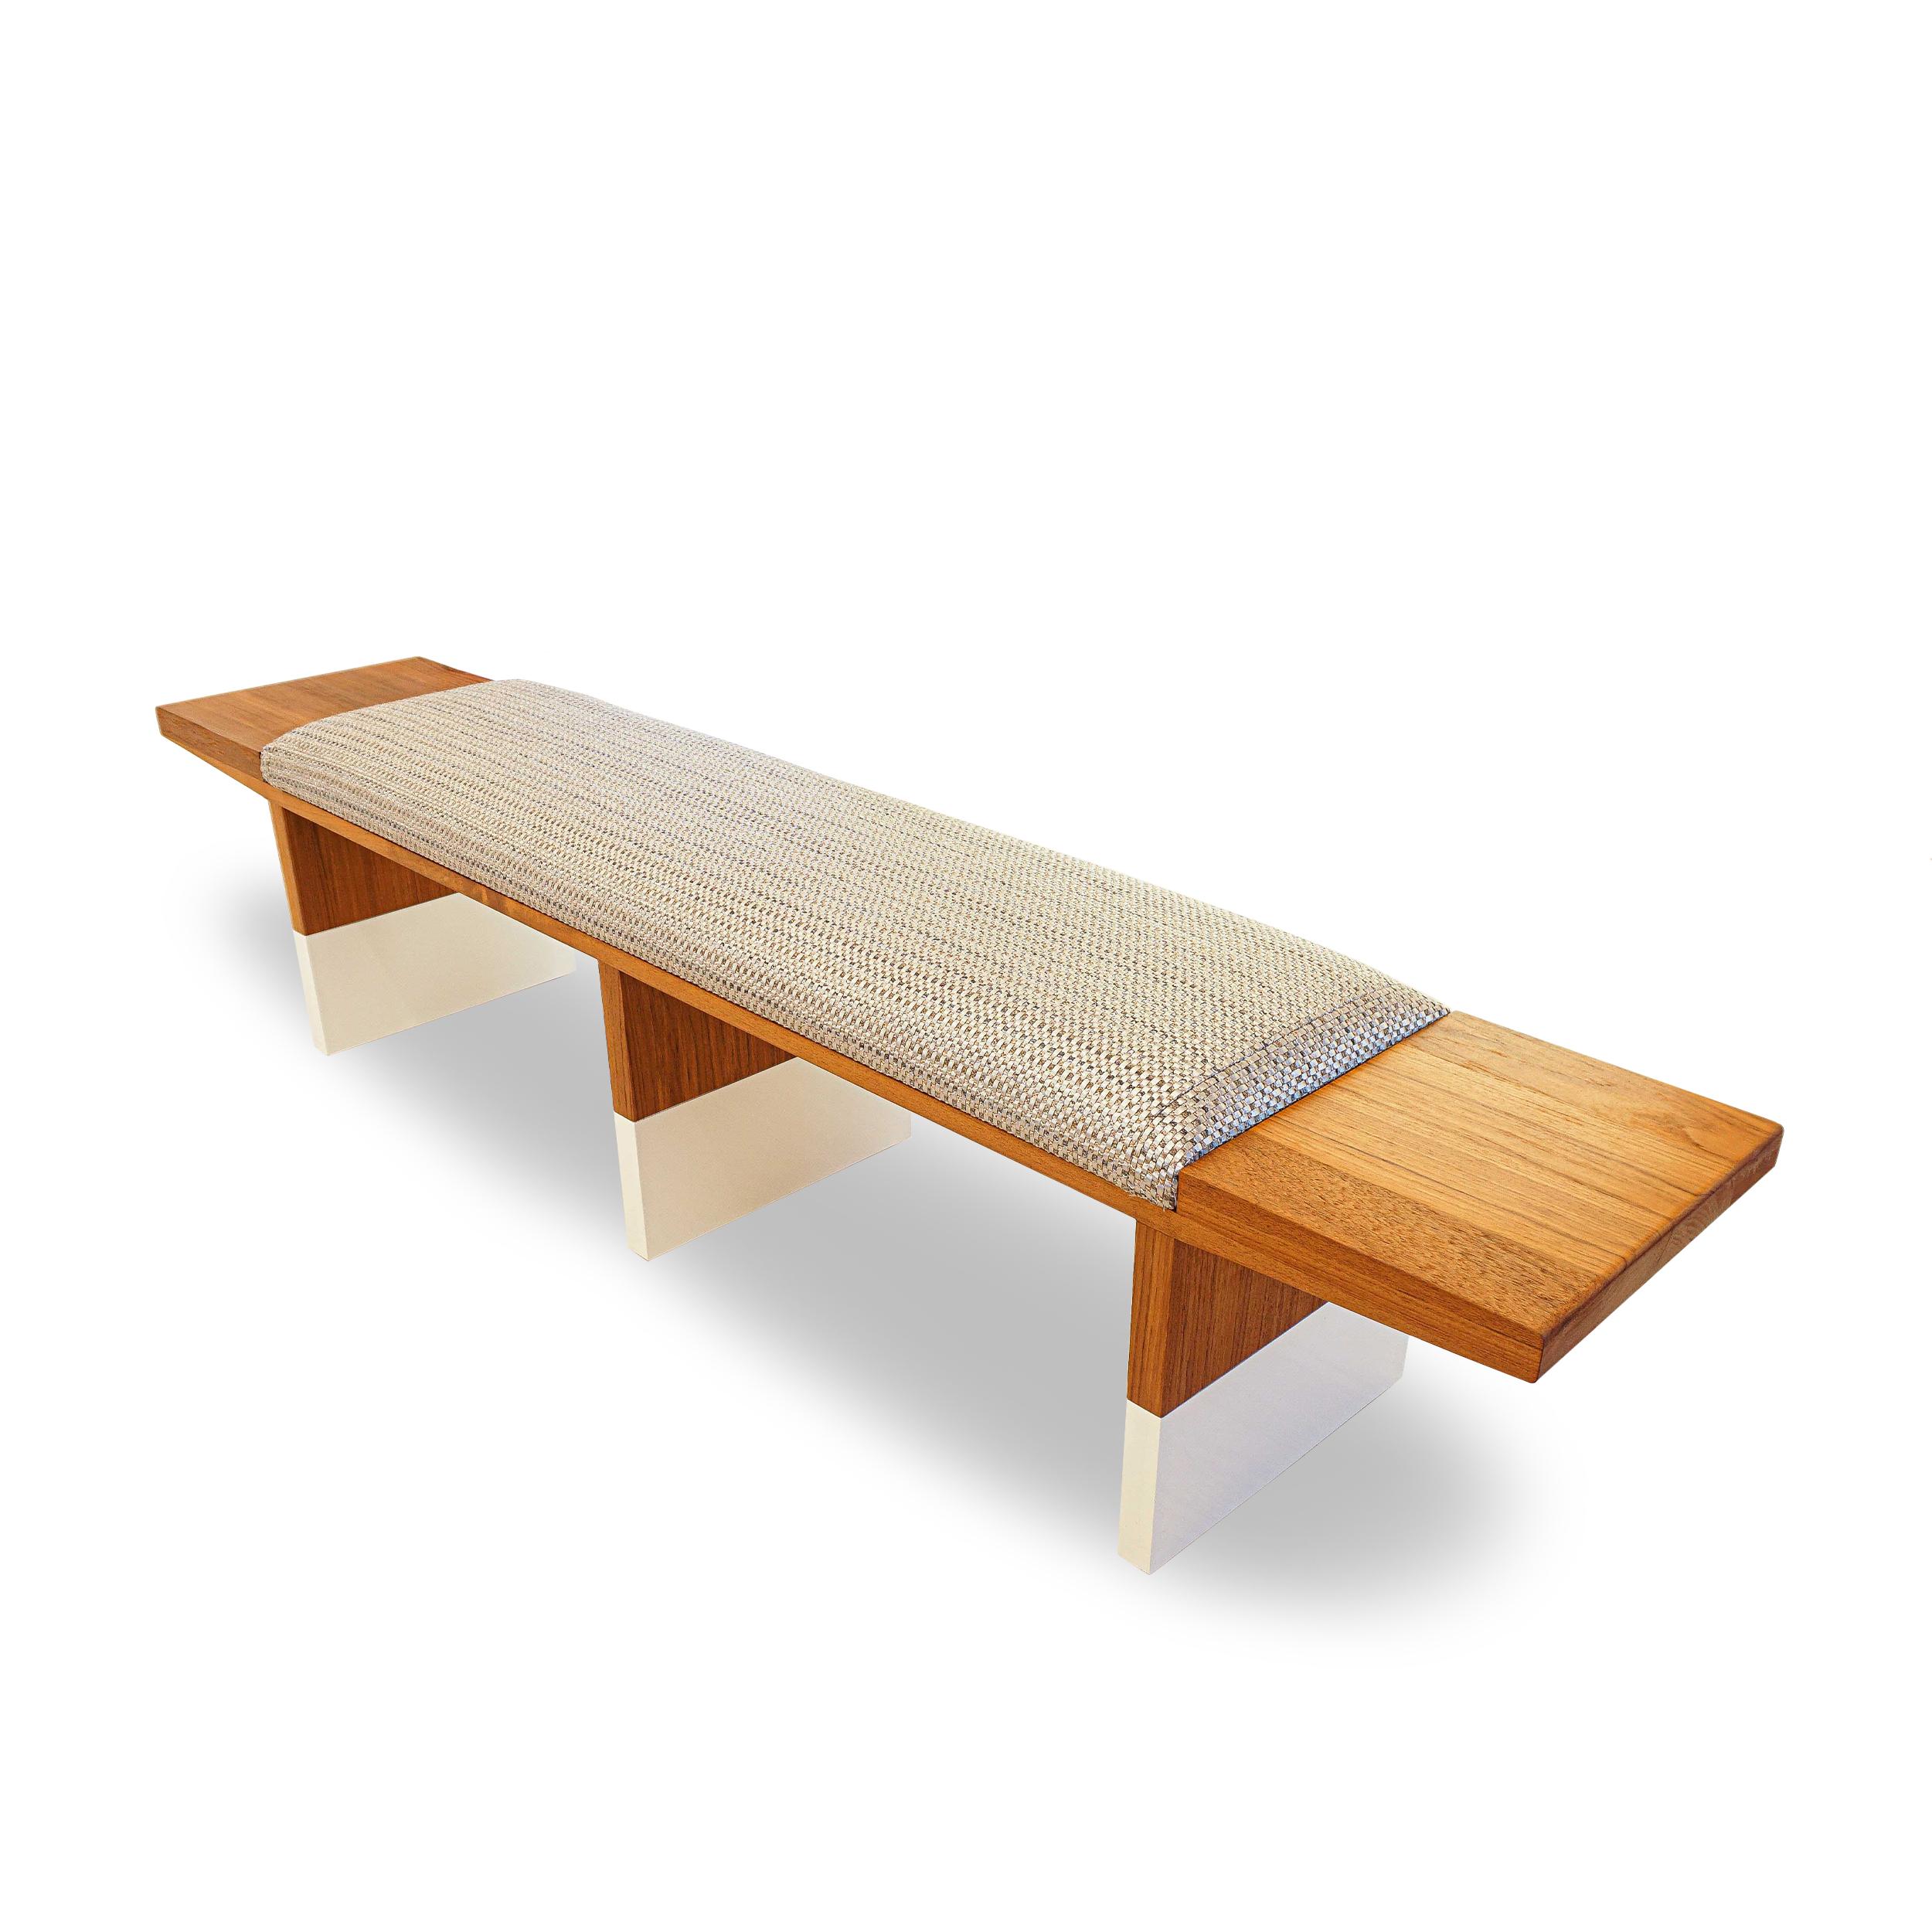 Mid-century inspired teak bench with protective clear coat finish and White Lacquer Dipped Legs. Topped with a 1 1/2